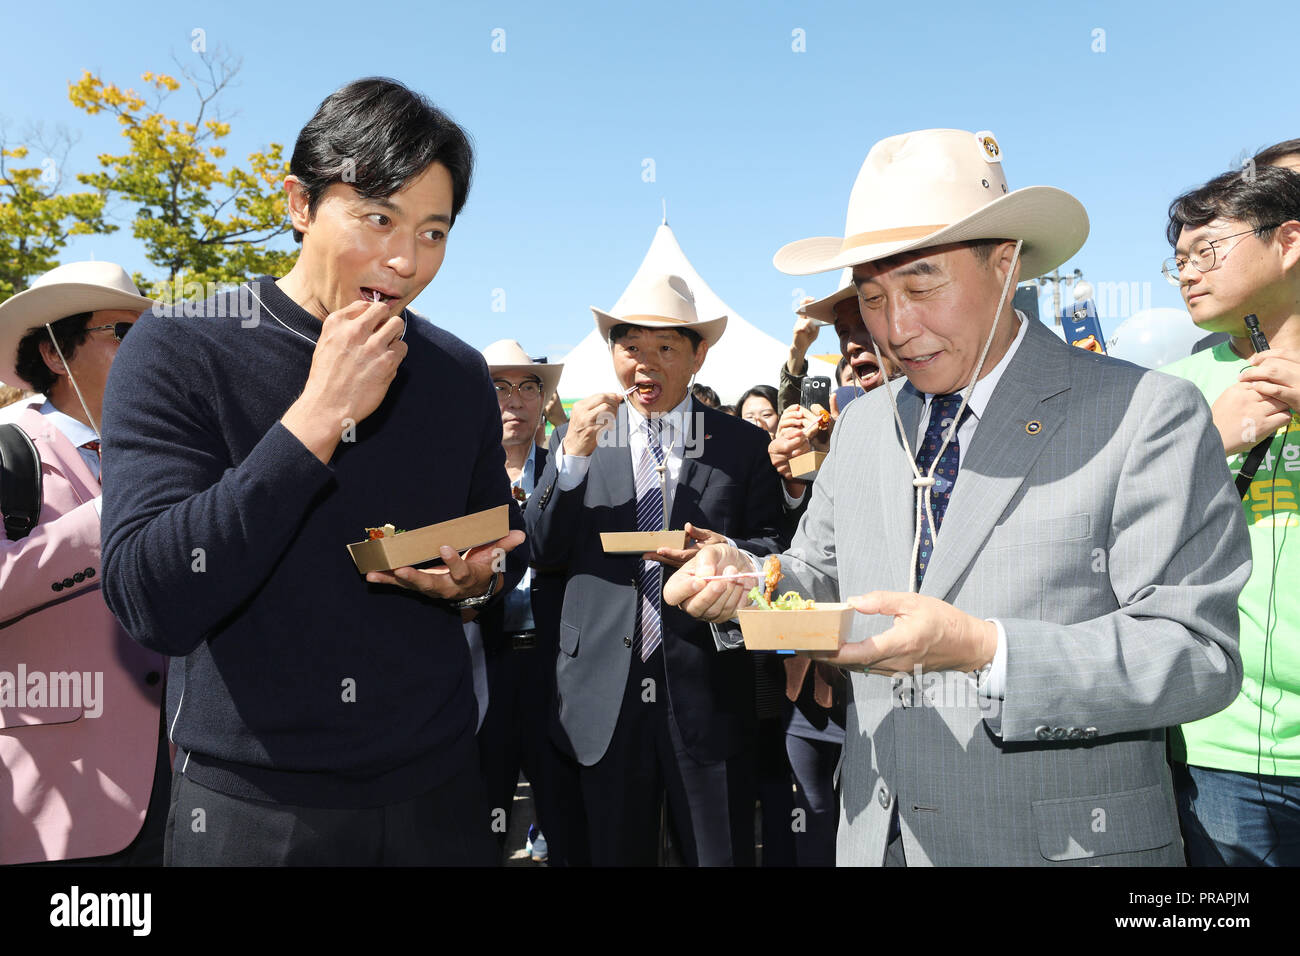 01st Oct, 2018. S. Korean actor Jang Dong-gun South Korean actor Jang Dong-gun (L) attends the 5th Handon Day at Seoul Land in Gwacheon, Gyeonggi Province, just south of Seoul, on Sept. 29, 2018. Credit: Yonhap/Newcom/Alamy Live News Stock Photo